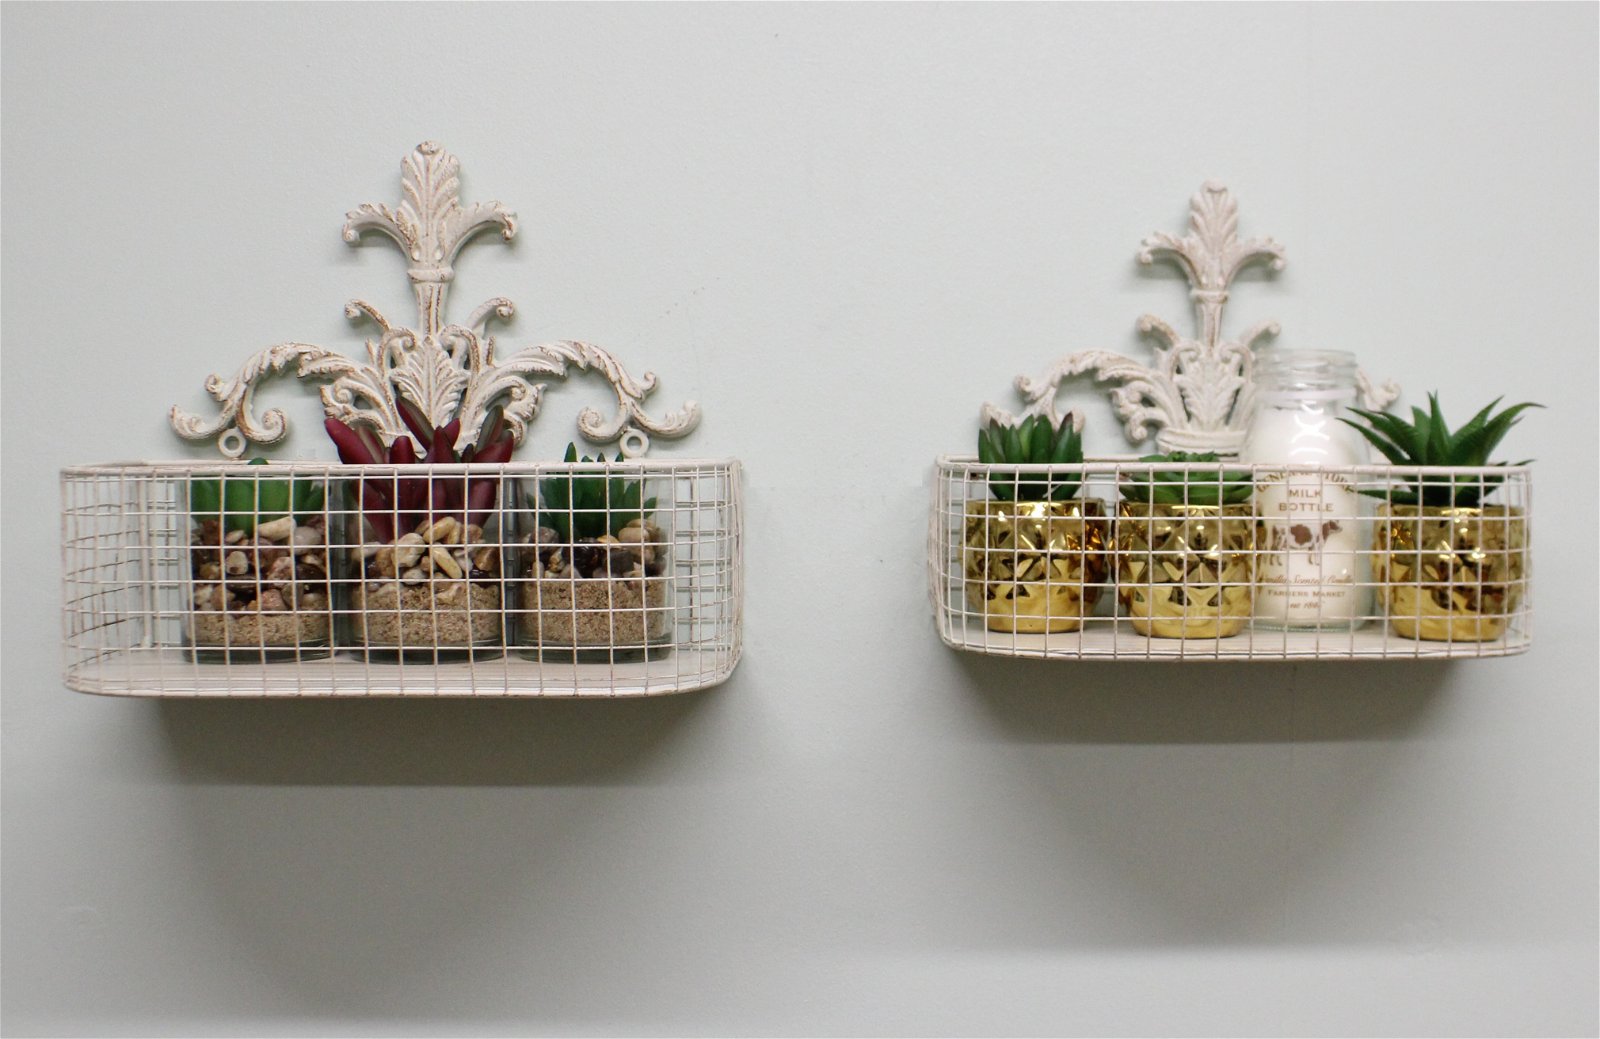 Set Of 2 Metal Wall Baskets In Cream - a Cheeky Plant